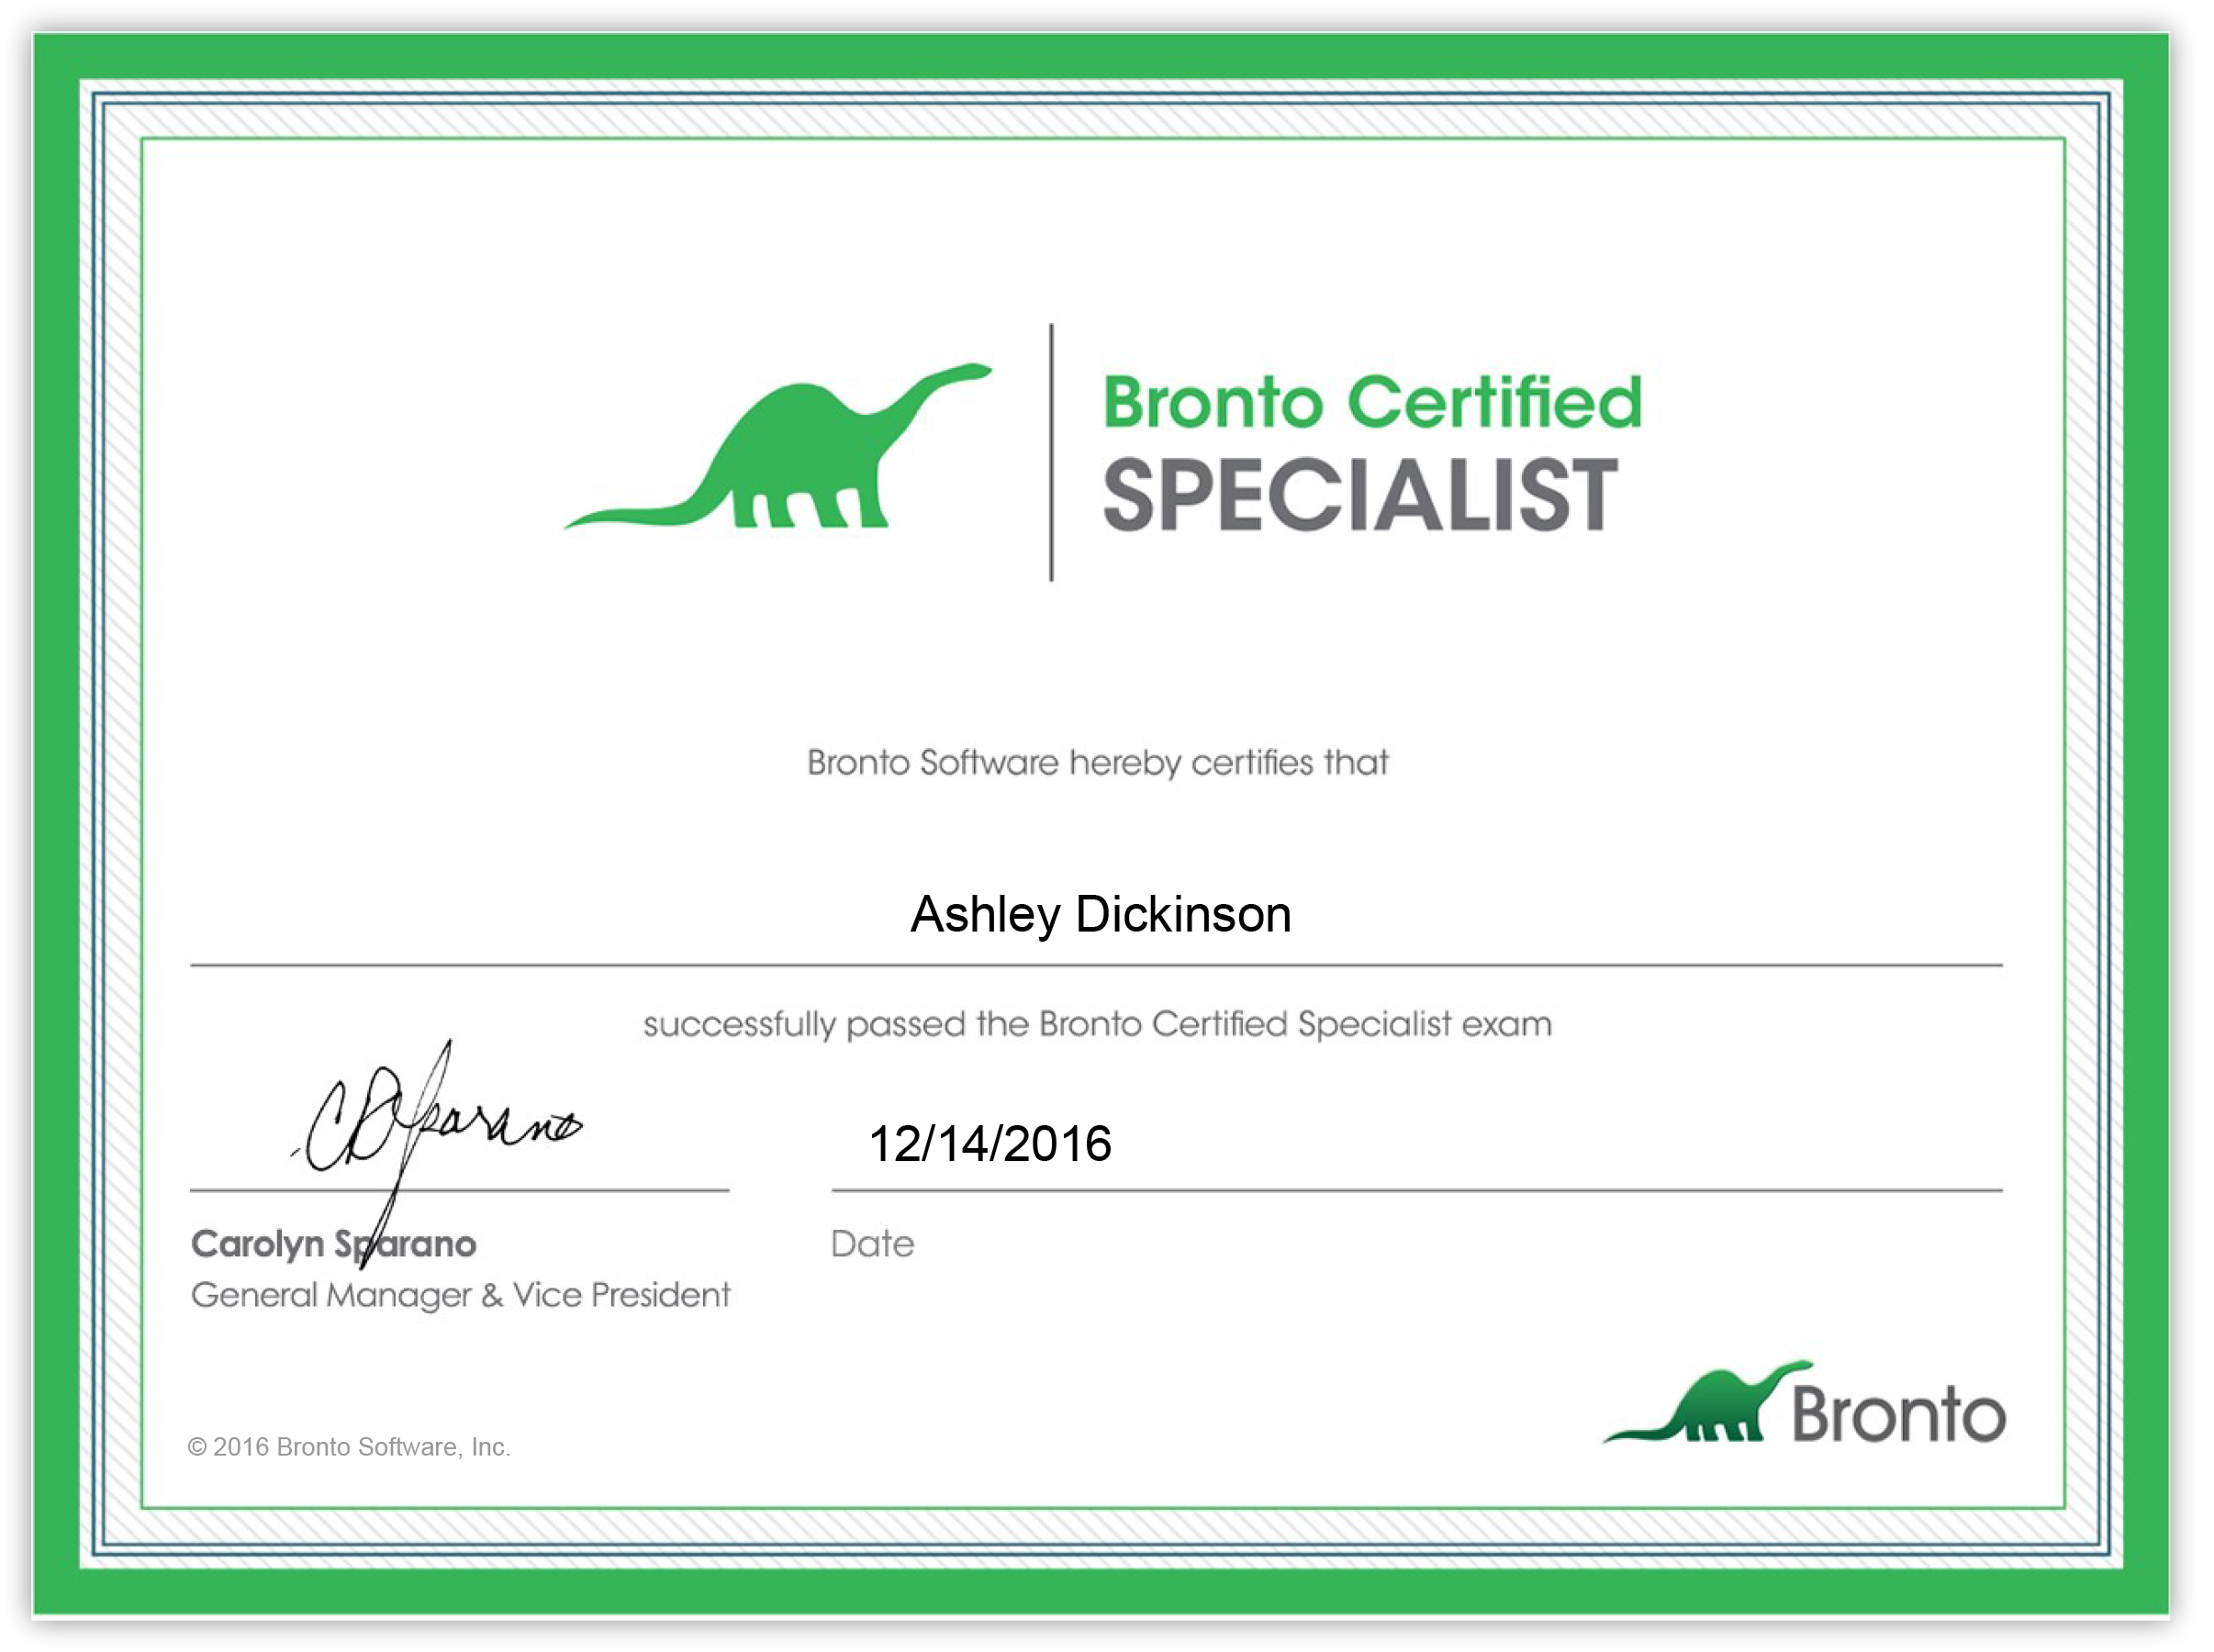 Bronto Certified Specialist